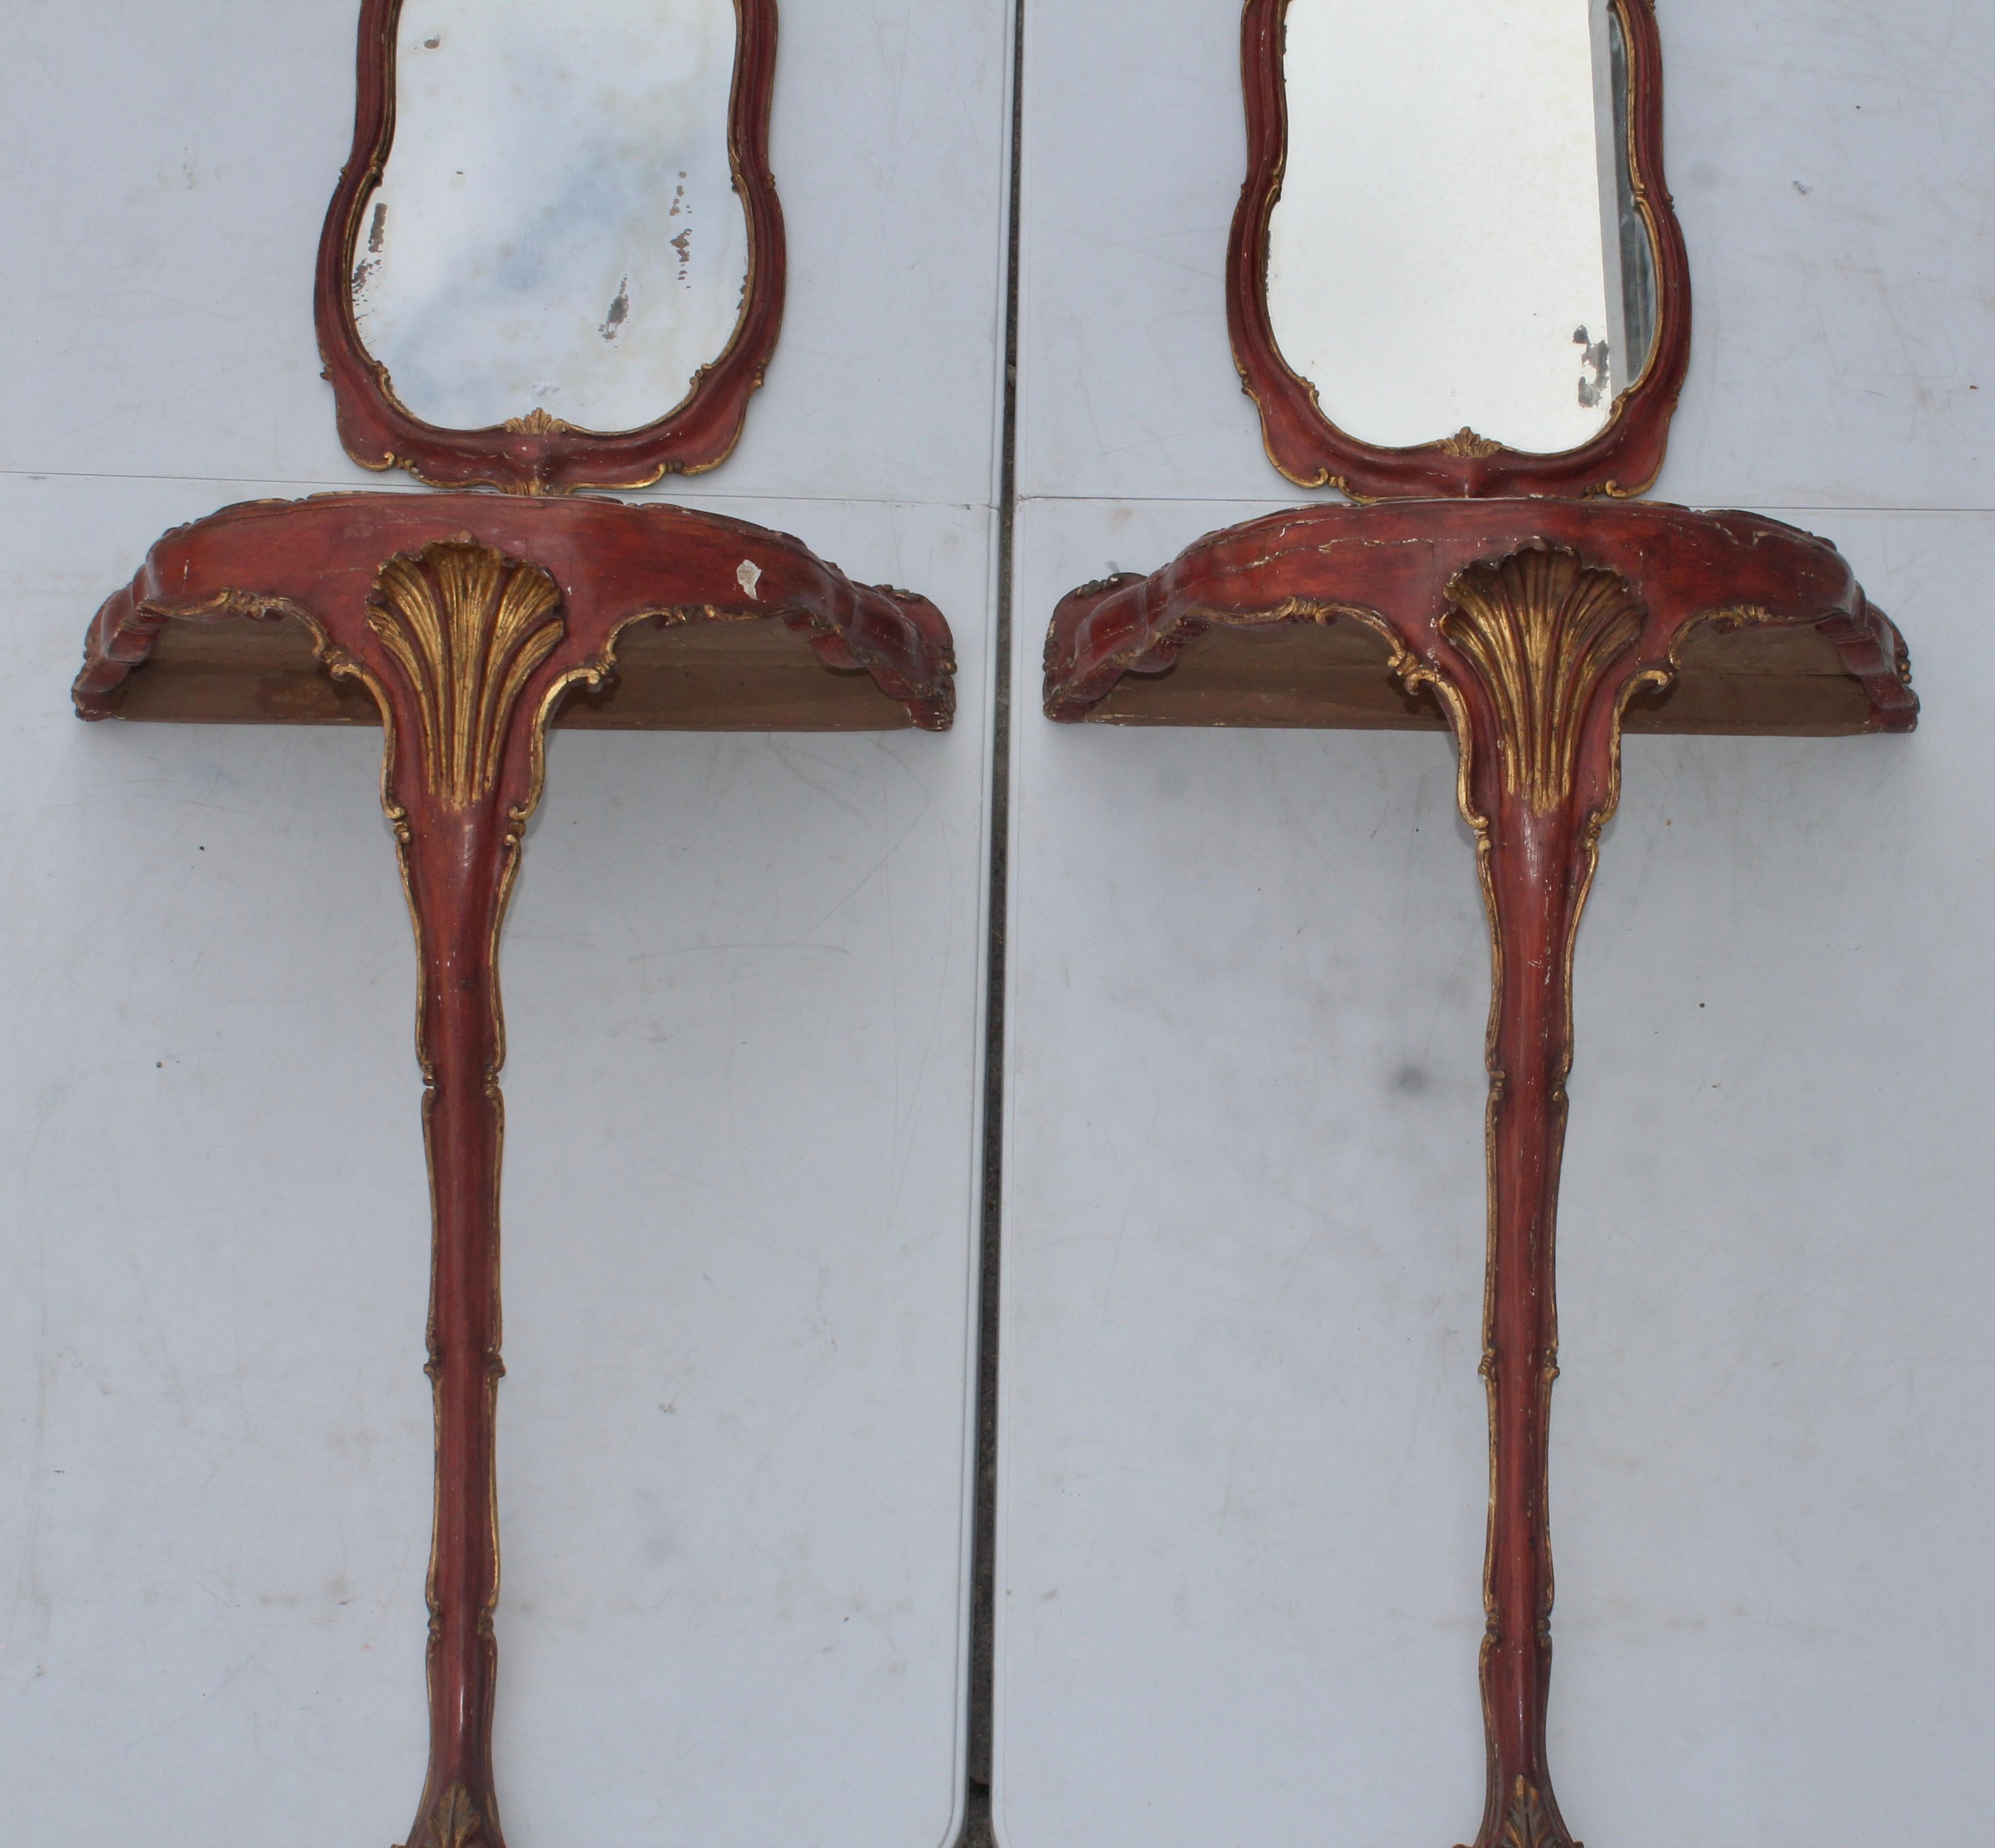 Rococo Revival 19th Century Italian Pair of Very Decorative Consoles and Mirrors